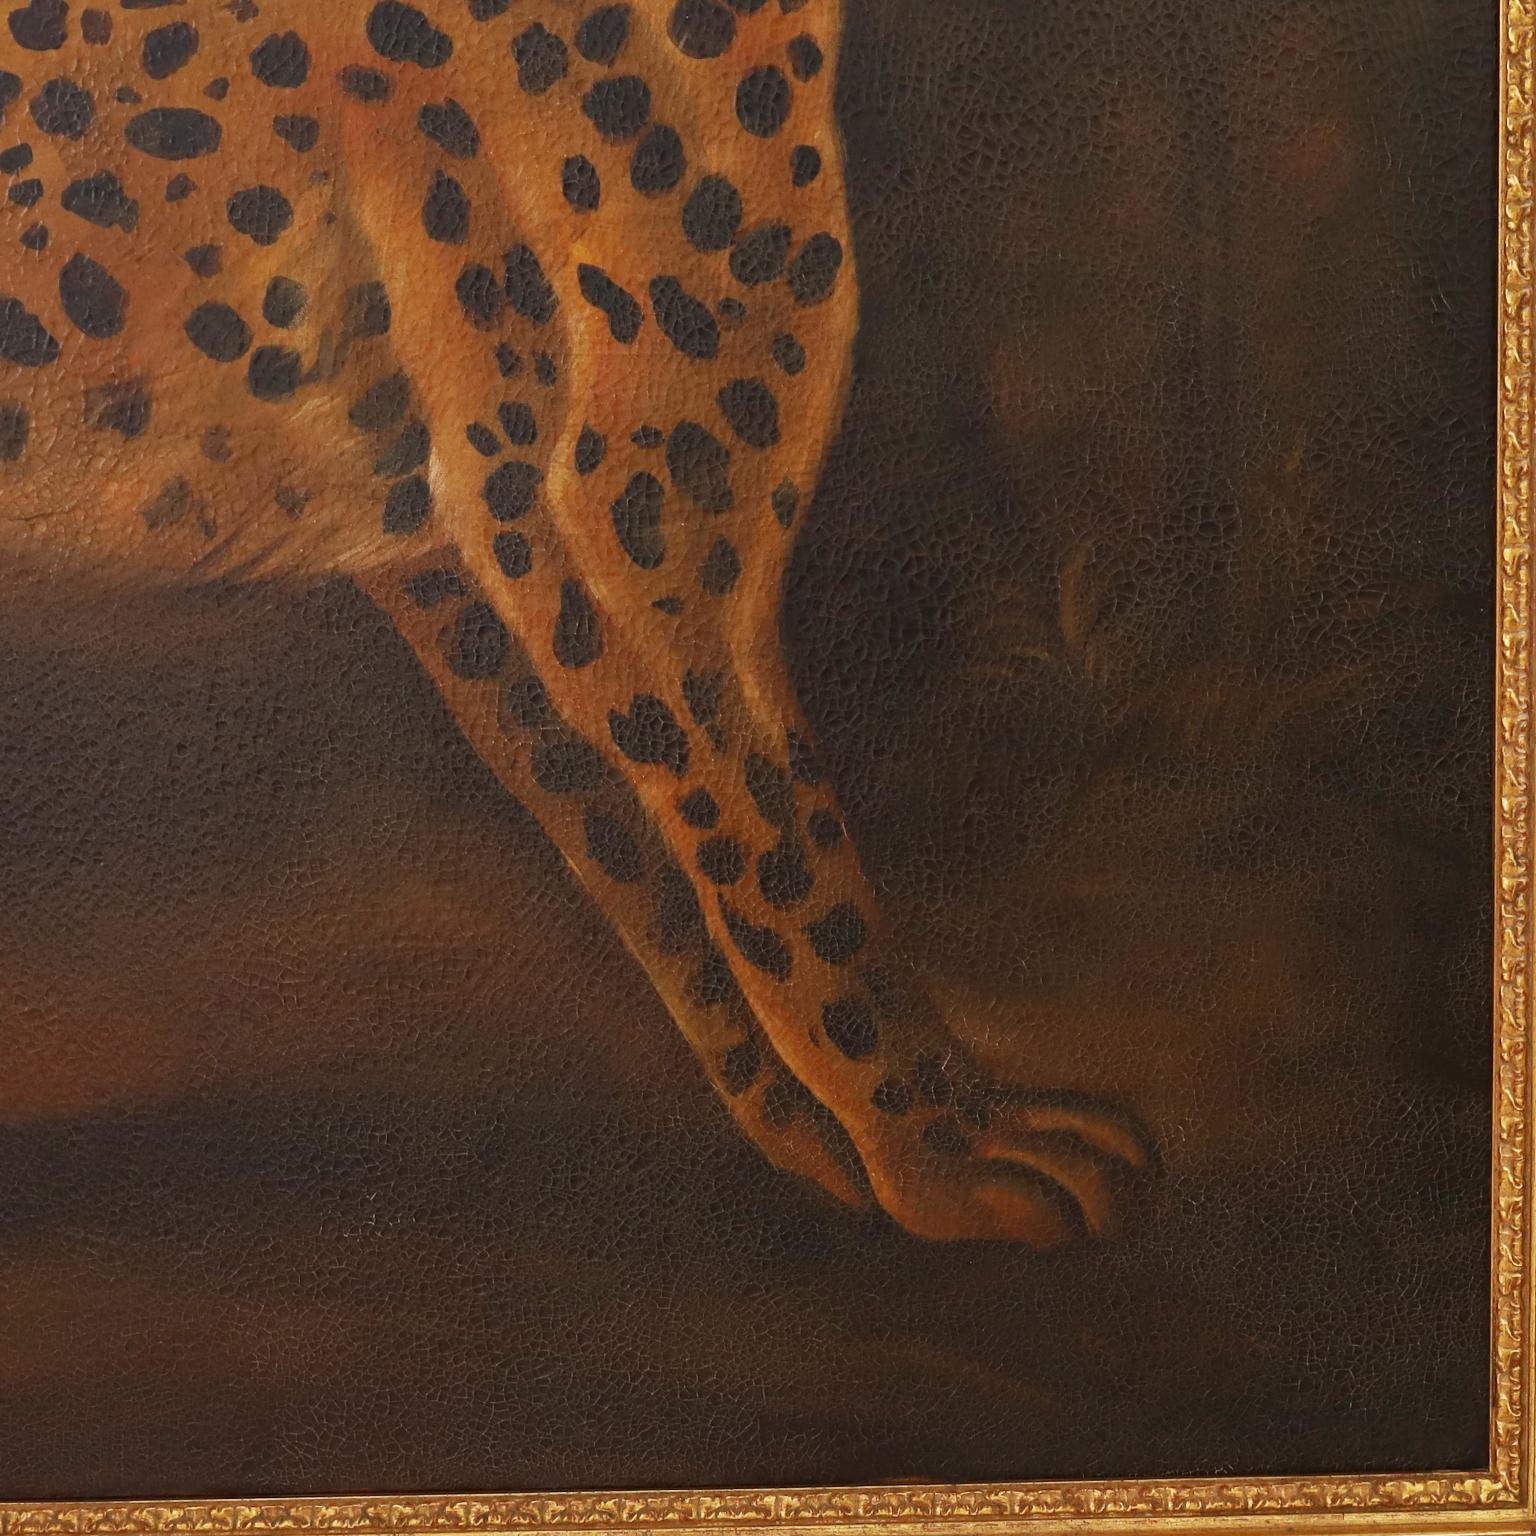 Eye catching oil painting on canvas of a pet cheetah or leopard in a jungle setting executed in a tongue and cheek Victorian parlor painting style with contrived aging and a touch of whimsy. Faintly signed Reginald Baxter in the lower right and